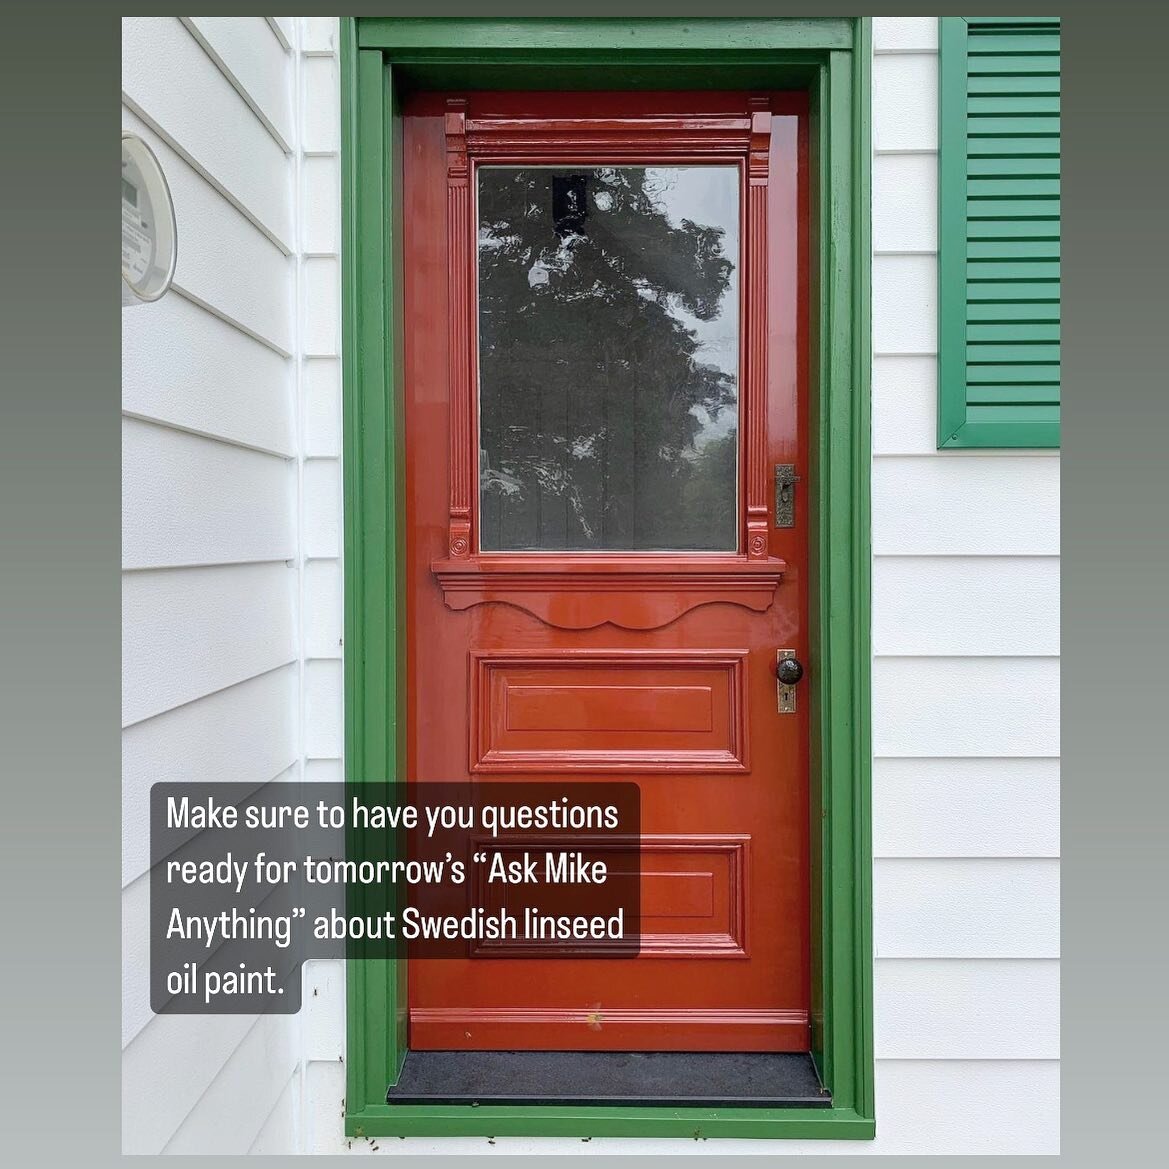 What do you want to know about Swedish linseed oil paint? Drop us a question below or send us a DM. 

#doorsofhamont #doorsofinstagram #wooddoor #woodendoor #woodworker #historichomes #finefinishes  #restore  #rebuild #custommillwork #homedesign #arc